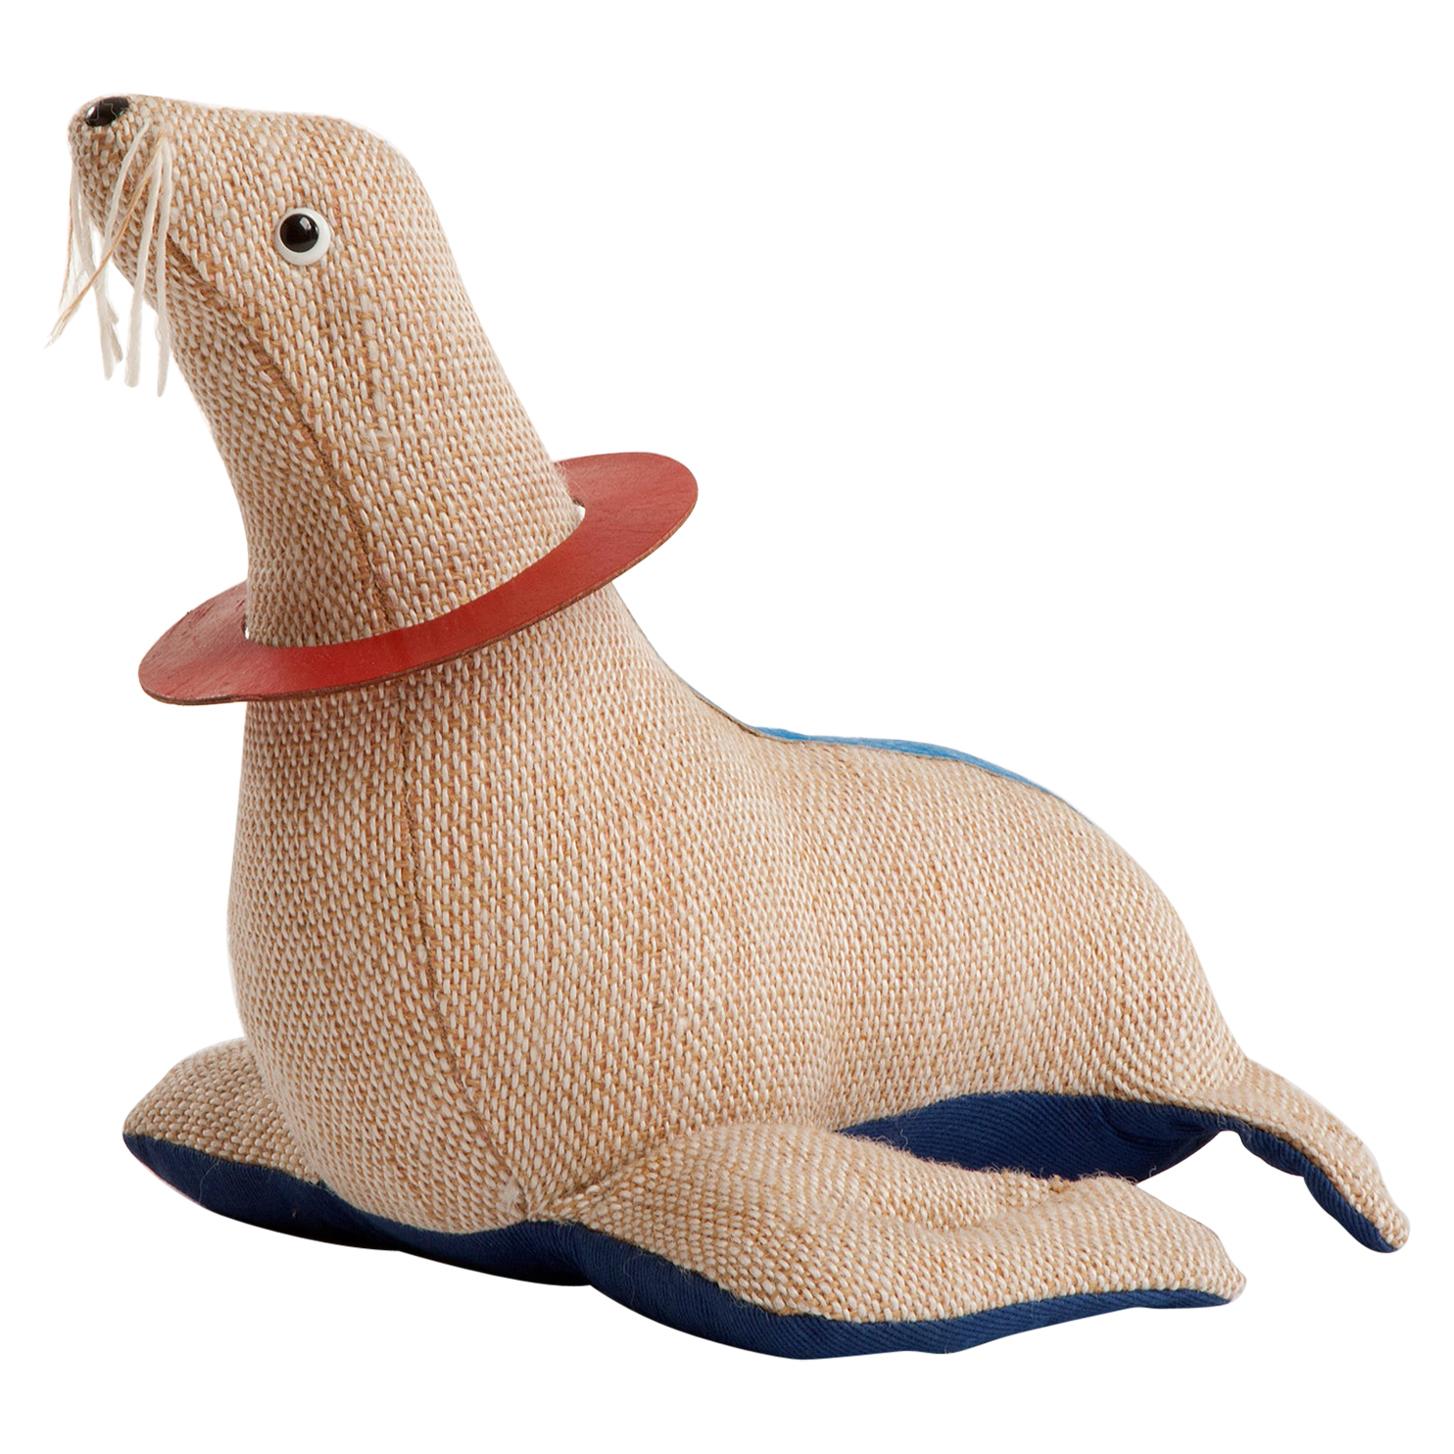 Therapeutic Toy Seal in Jute with Leather by Renate Müller, 1965-1971